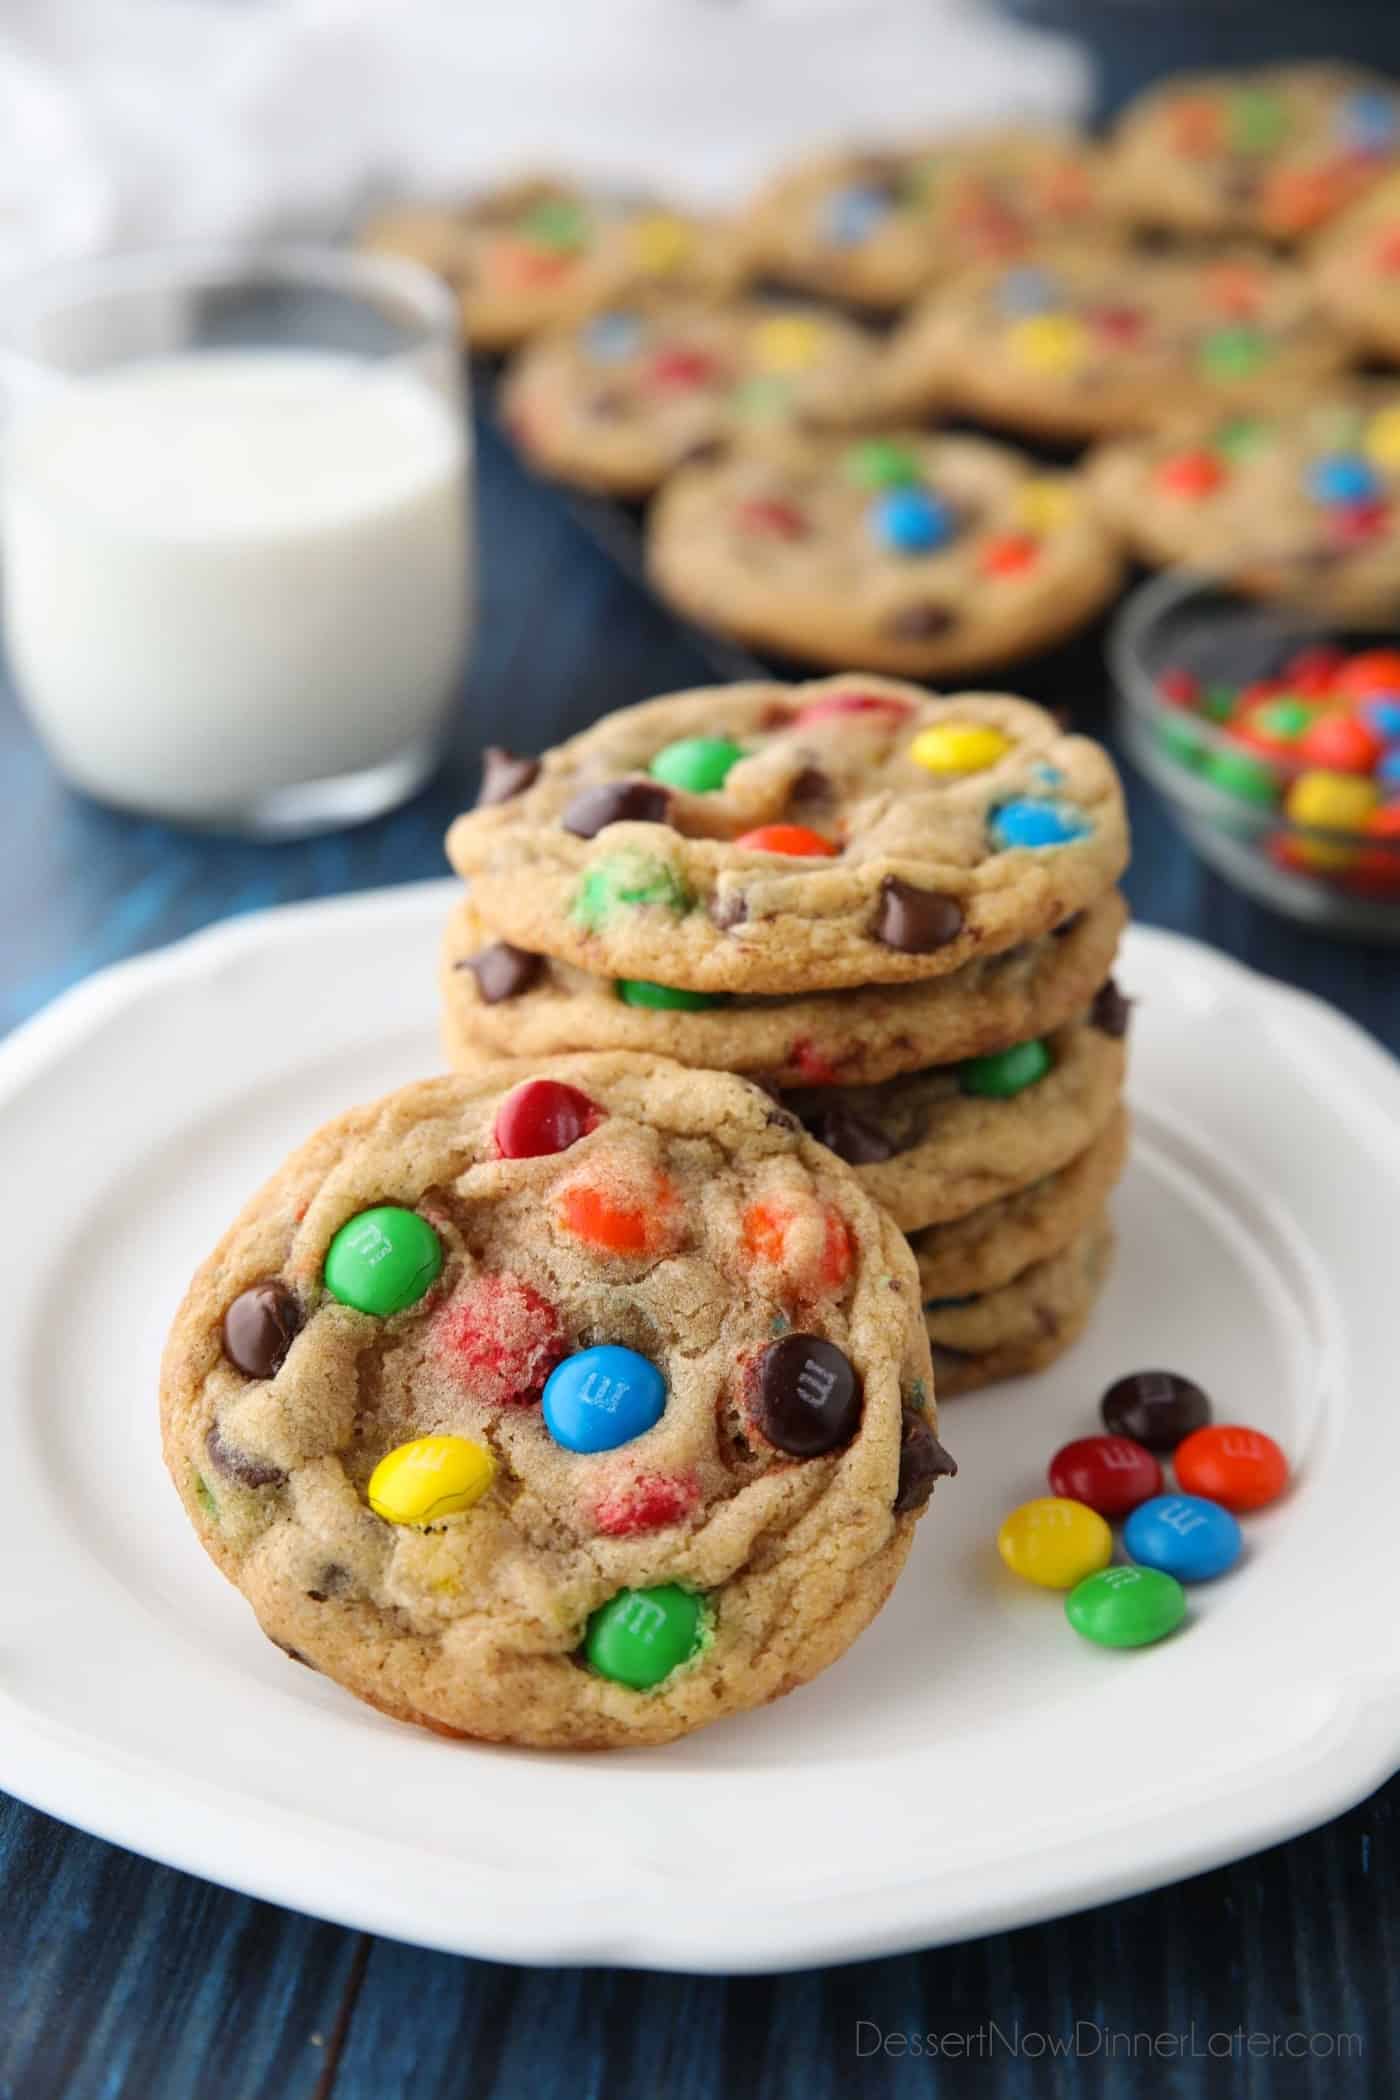 M&M's New Flavor Combines Milk Chocolate and Chocolate Chip Cookies